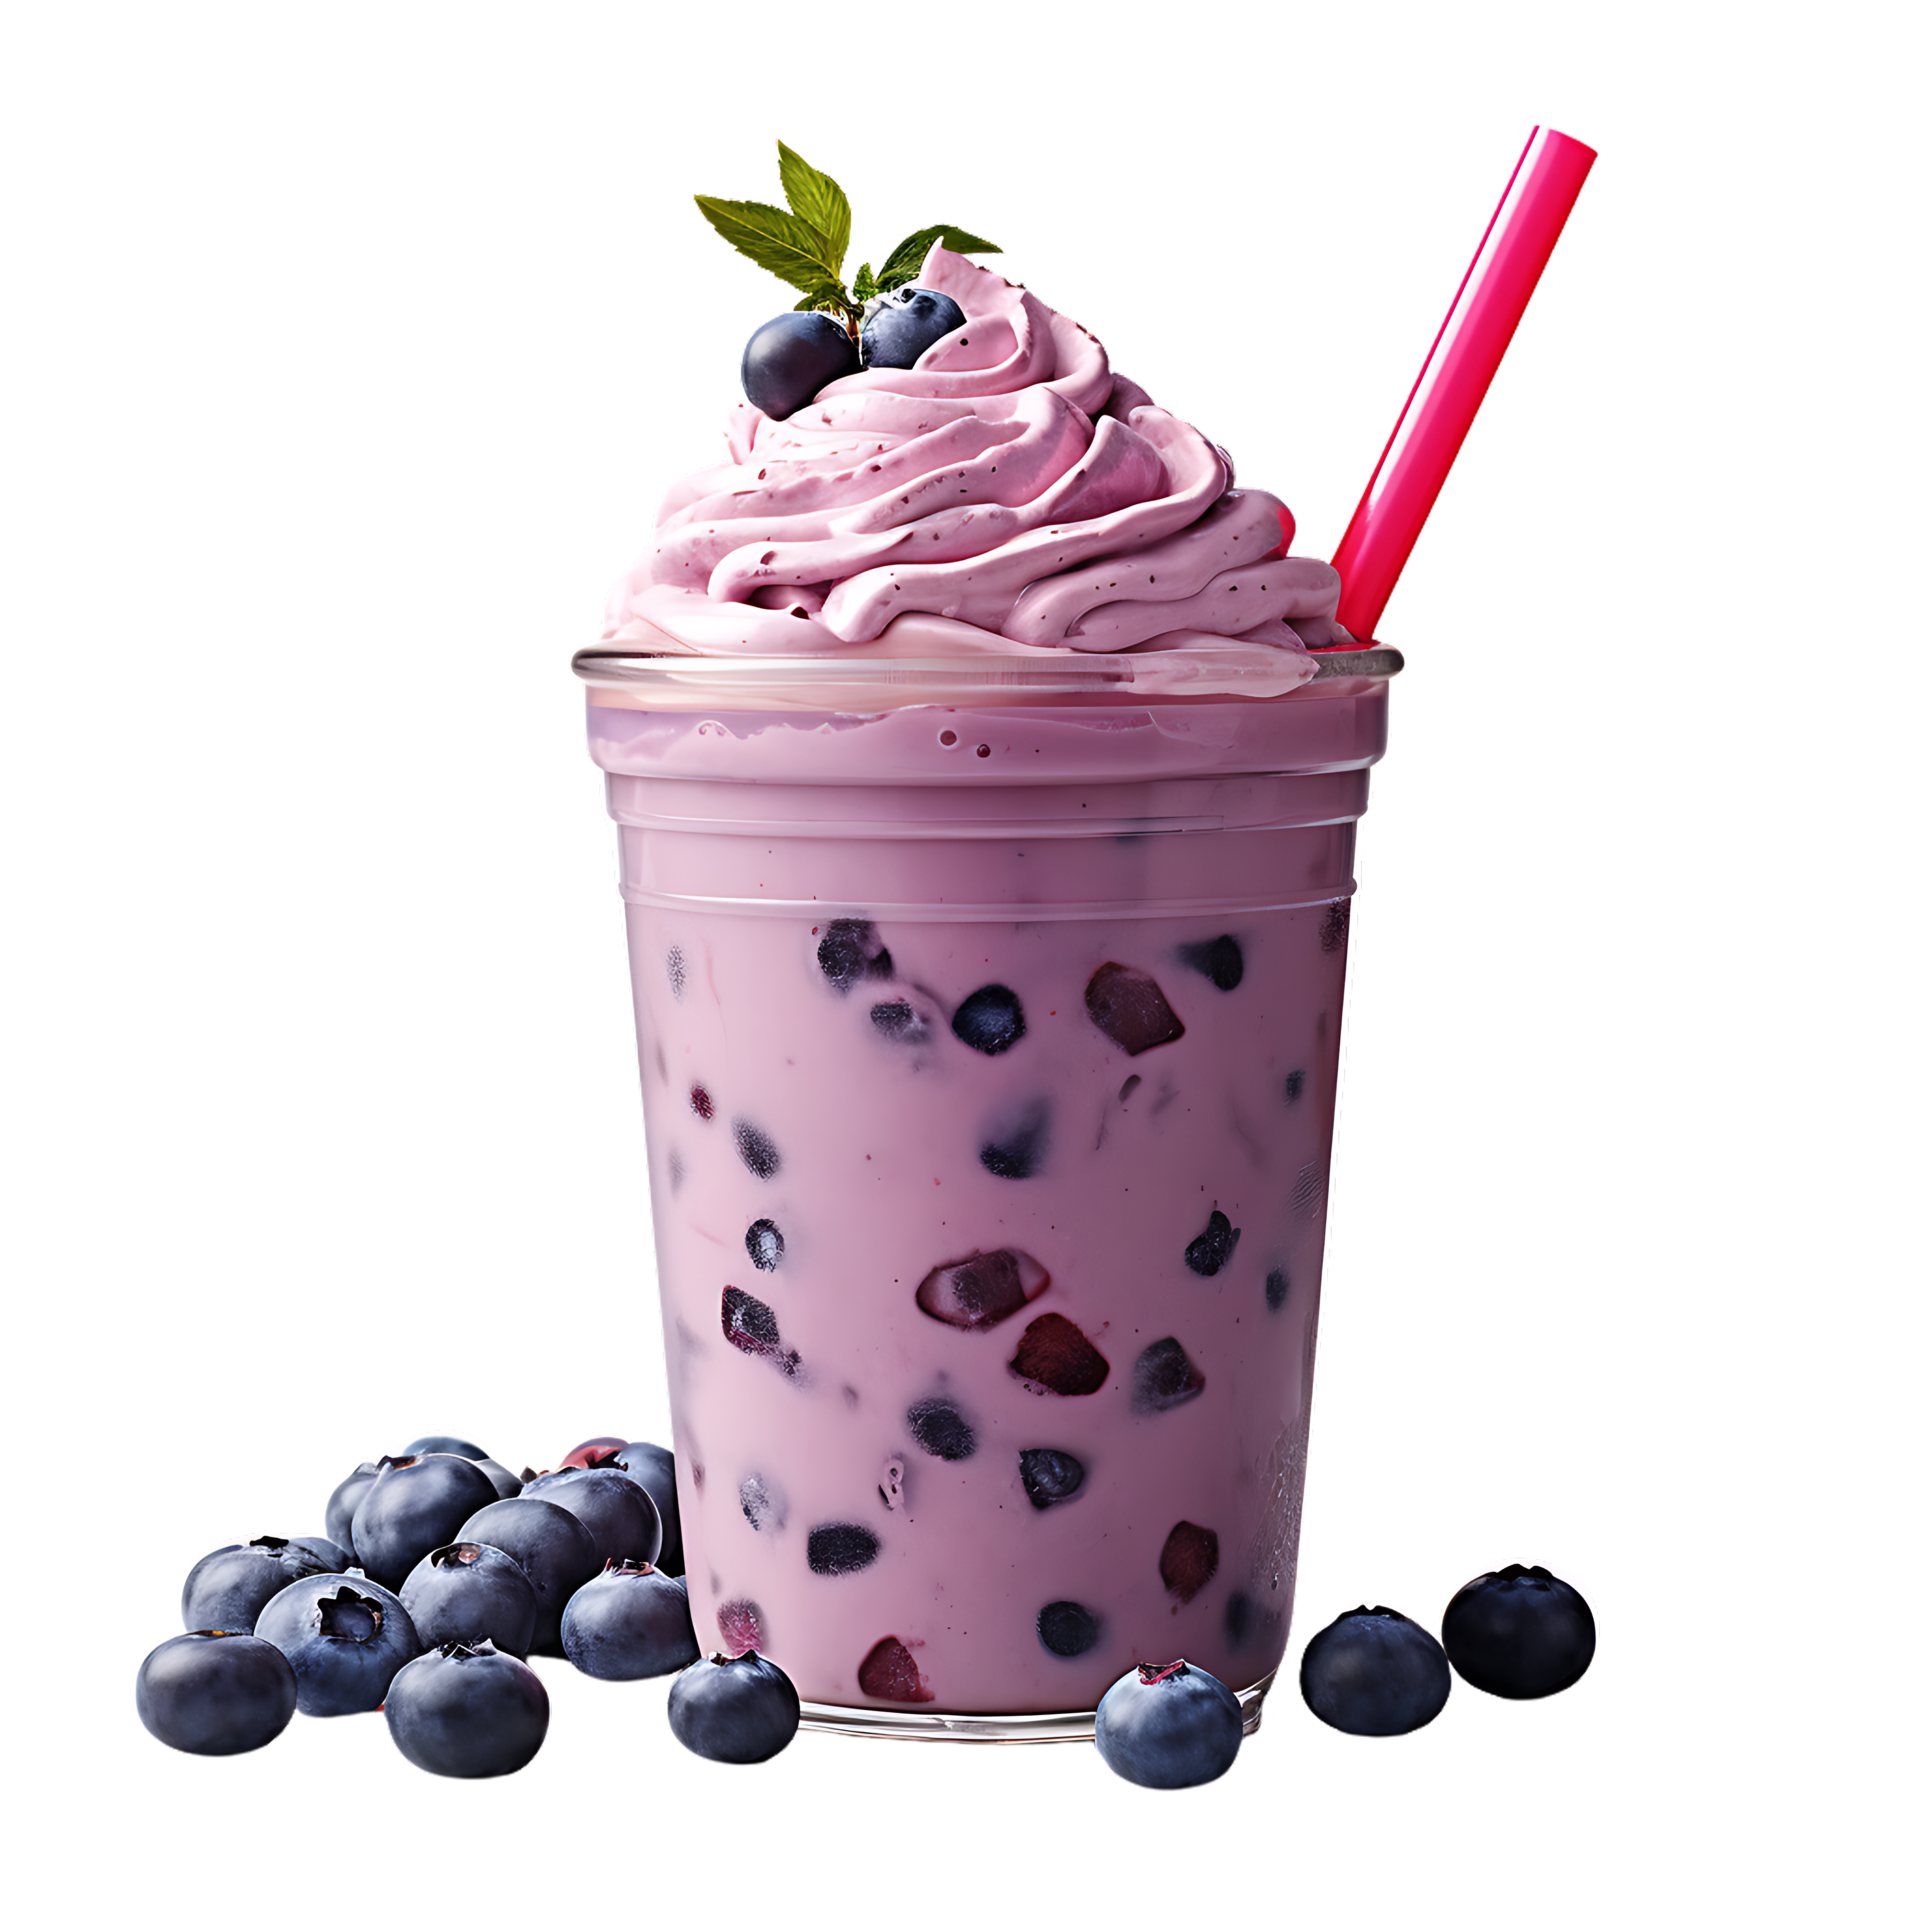 https://static.vecteezy.com/system/resources/previews/027/145/735/original/close-up-view-of-blueberry-smoothies-perfect-for-drink-catalog-png.png